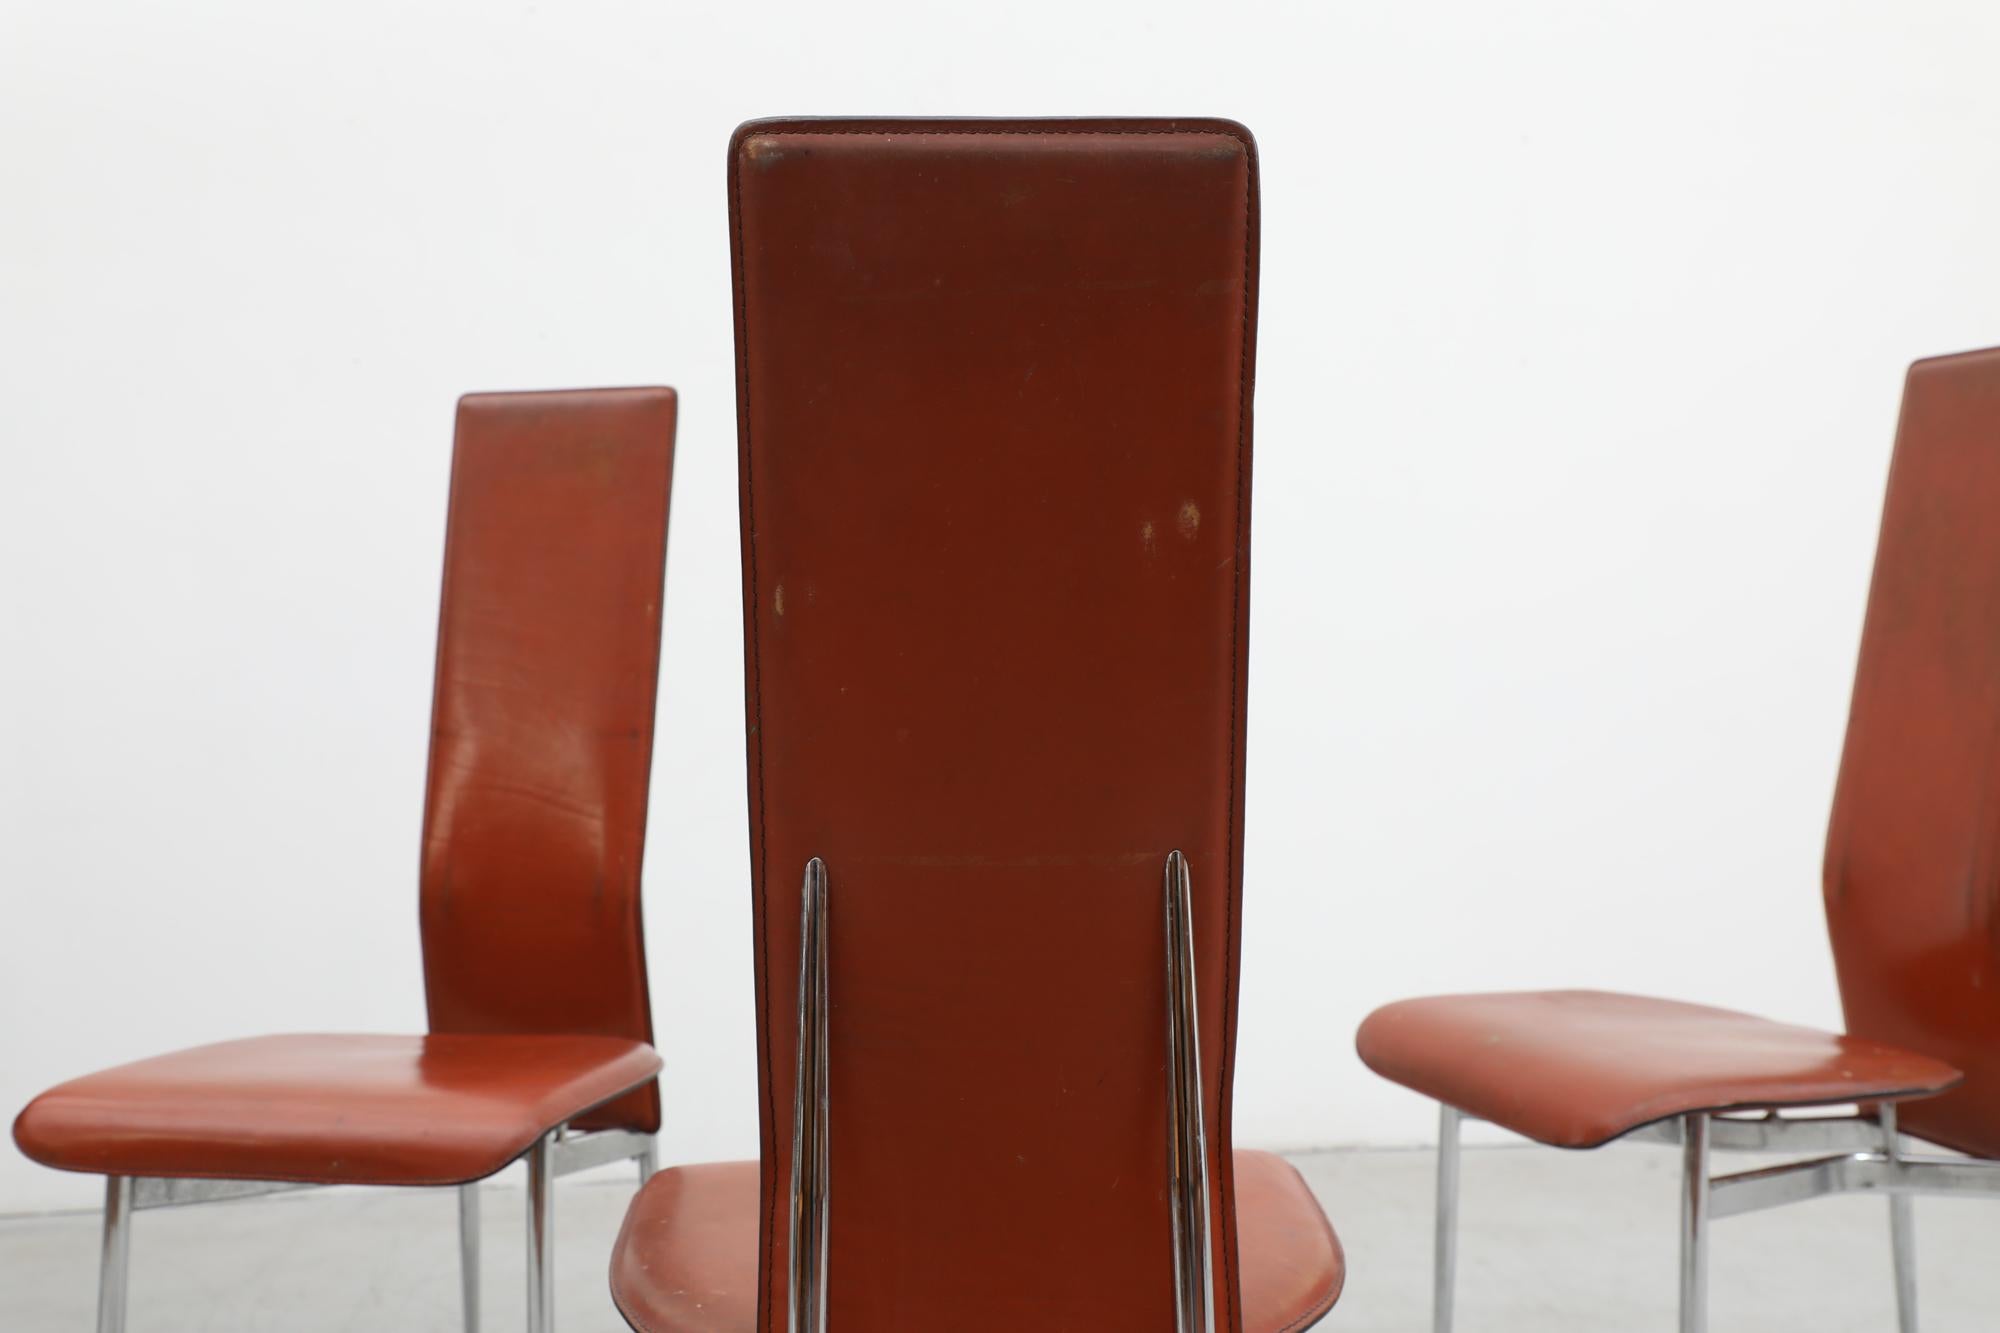 Set of 4 'S44' High Back Cognac Leather Chairs by Vegni & Gualtierotti for Fasem For Sale 7